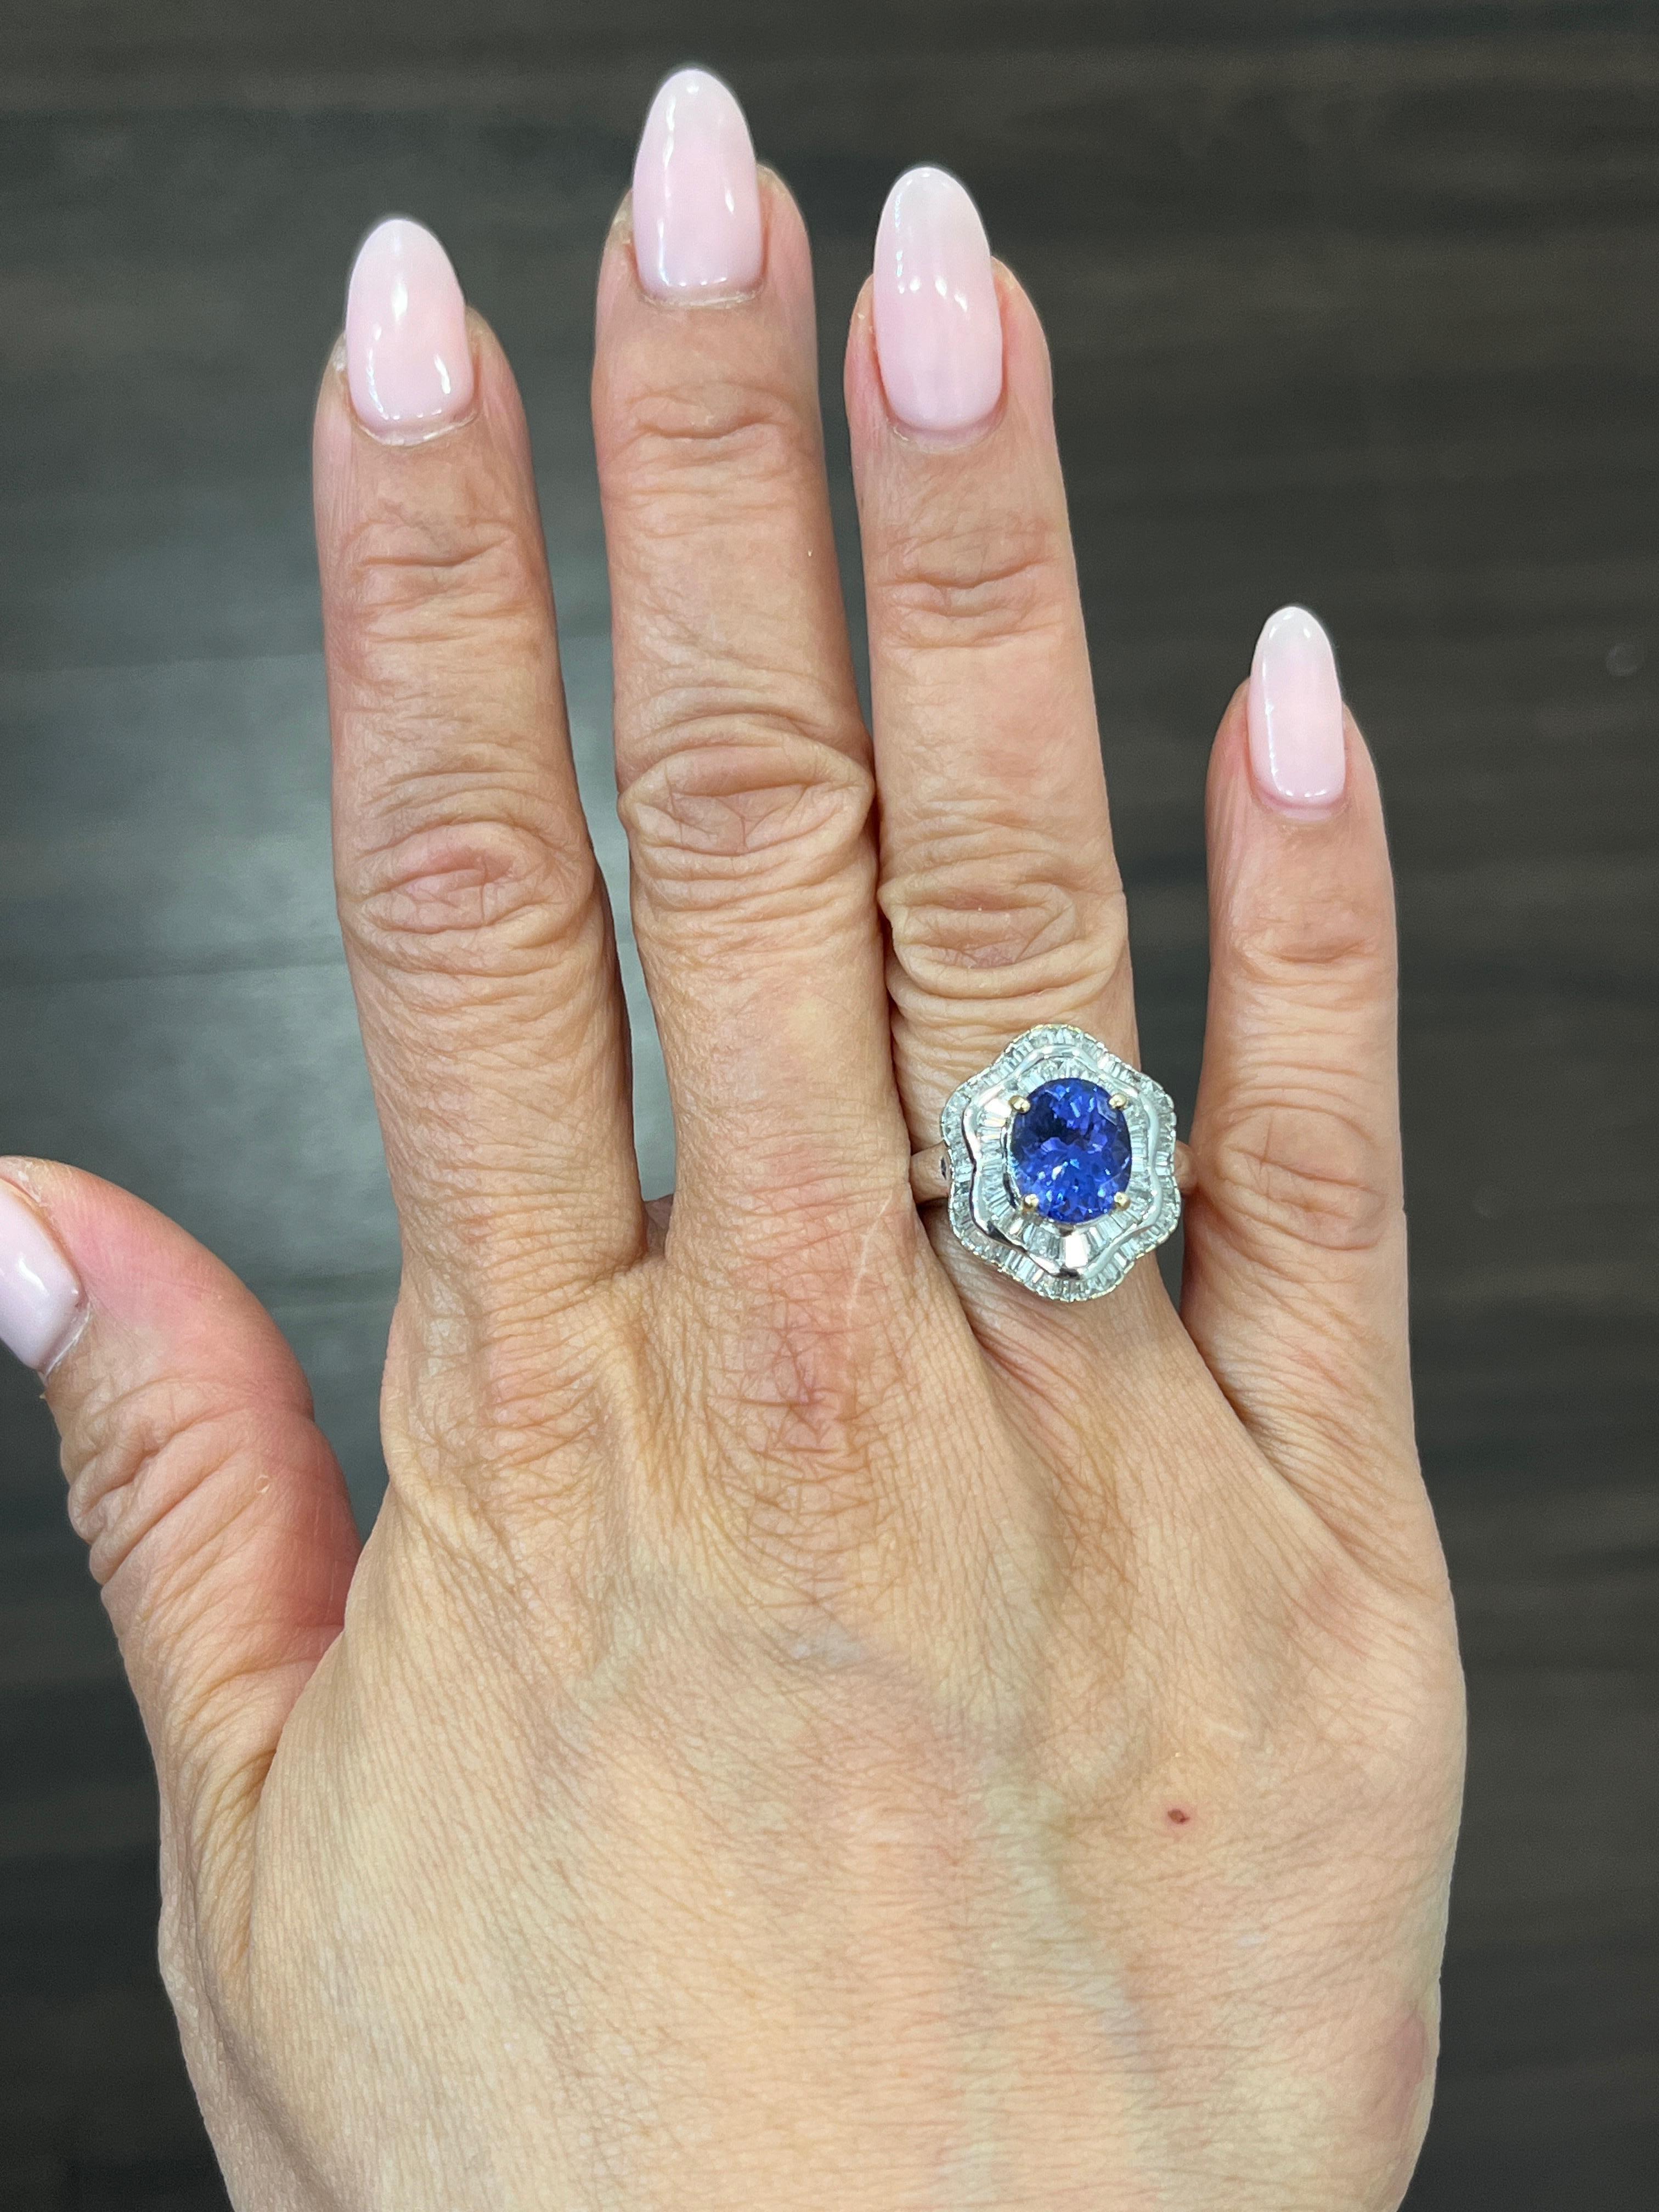 This stunning ring features a 3.11 carat oval-shaped tanzanite stone in a beautiful shade of blue, surrounded by sparkling white diamonds. The ring is made of 18k white gold and has a ring size of 7. The gemstones are set in a way that allows for